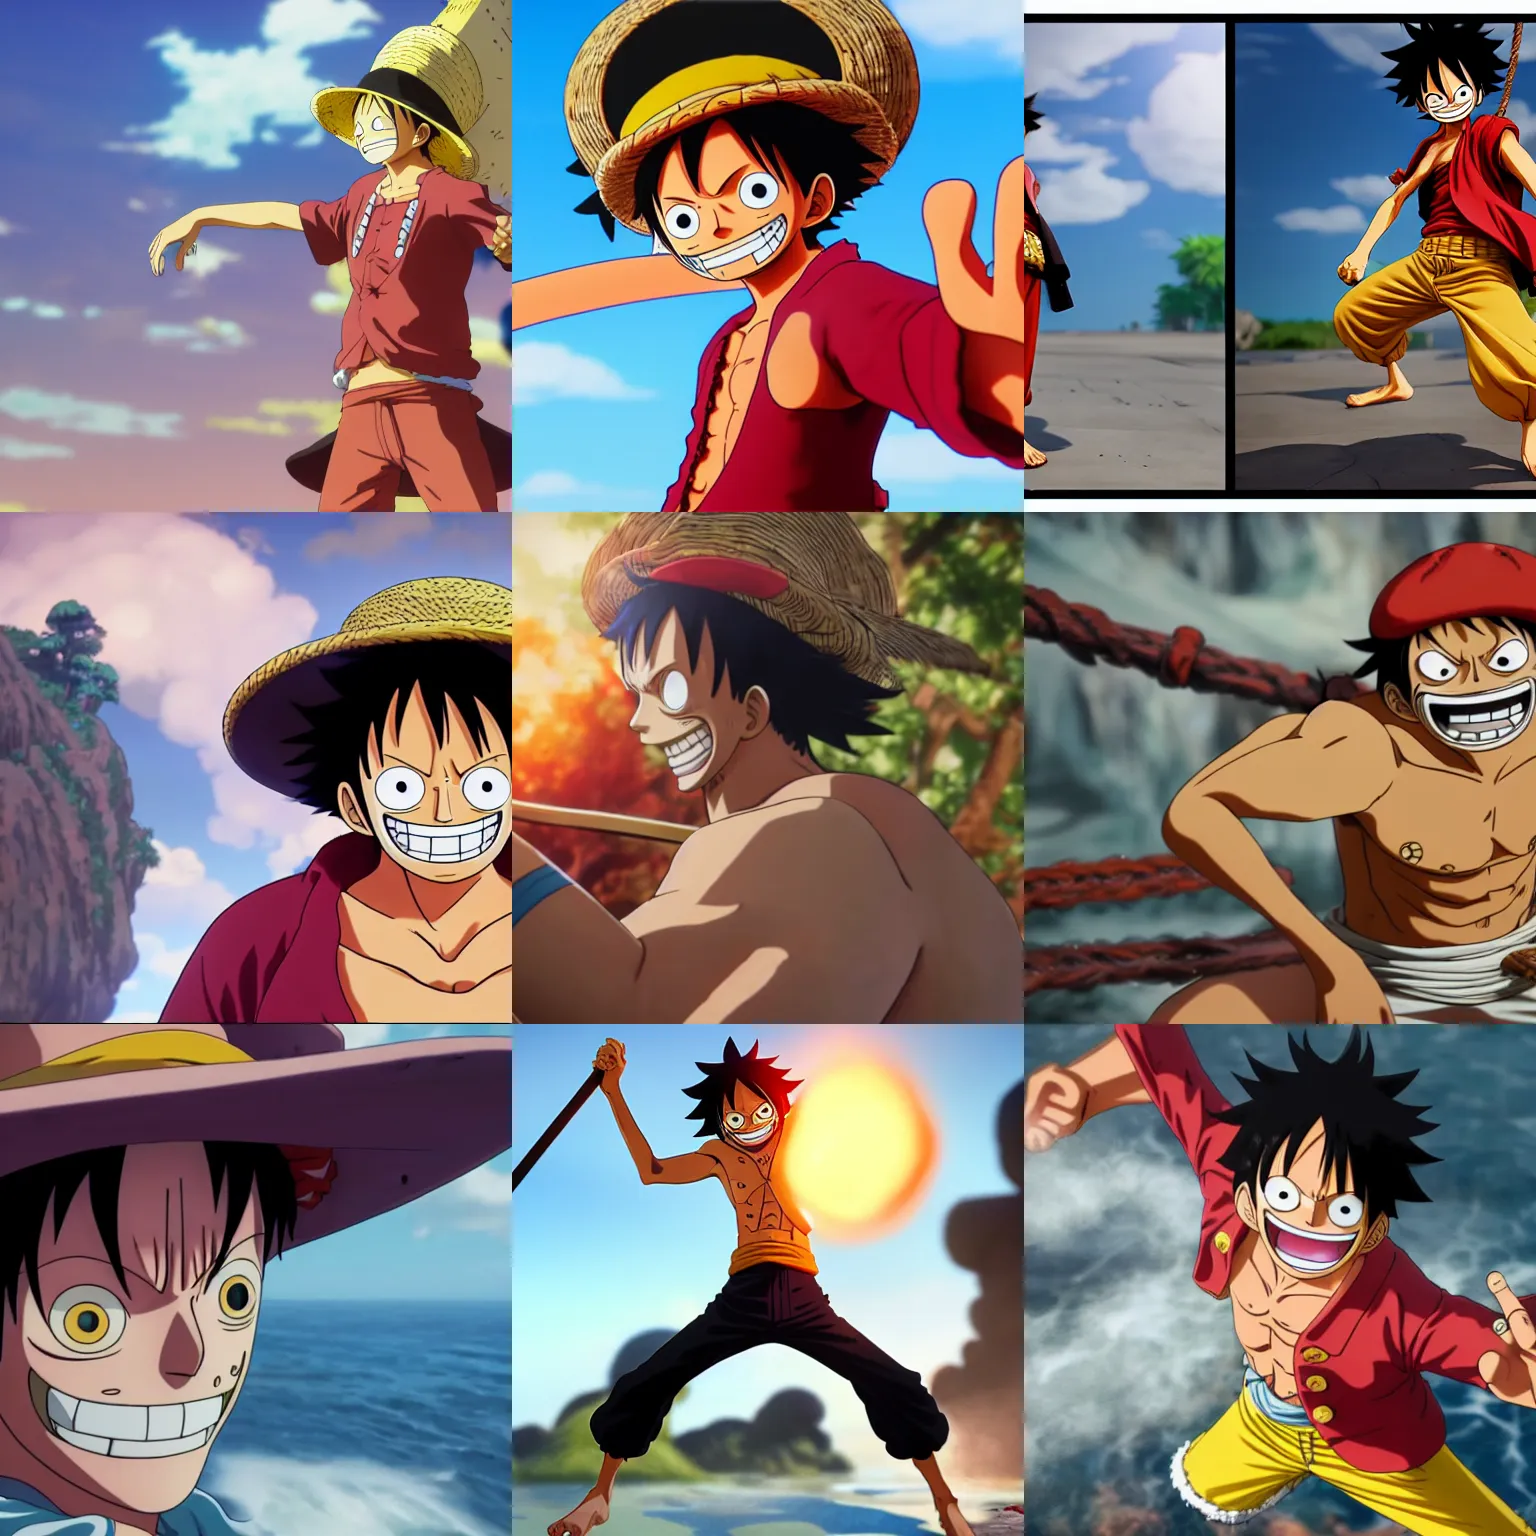 When will Luffy's Gear 5 be animated in One Piece?